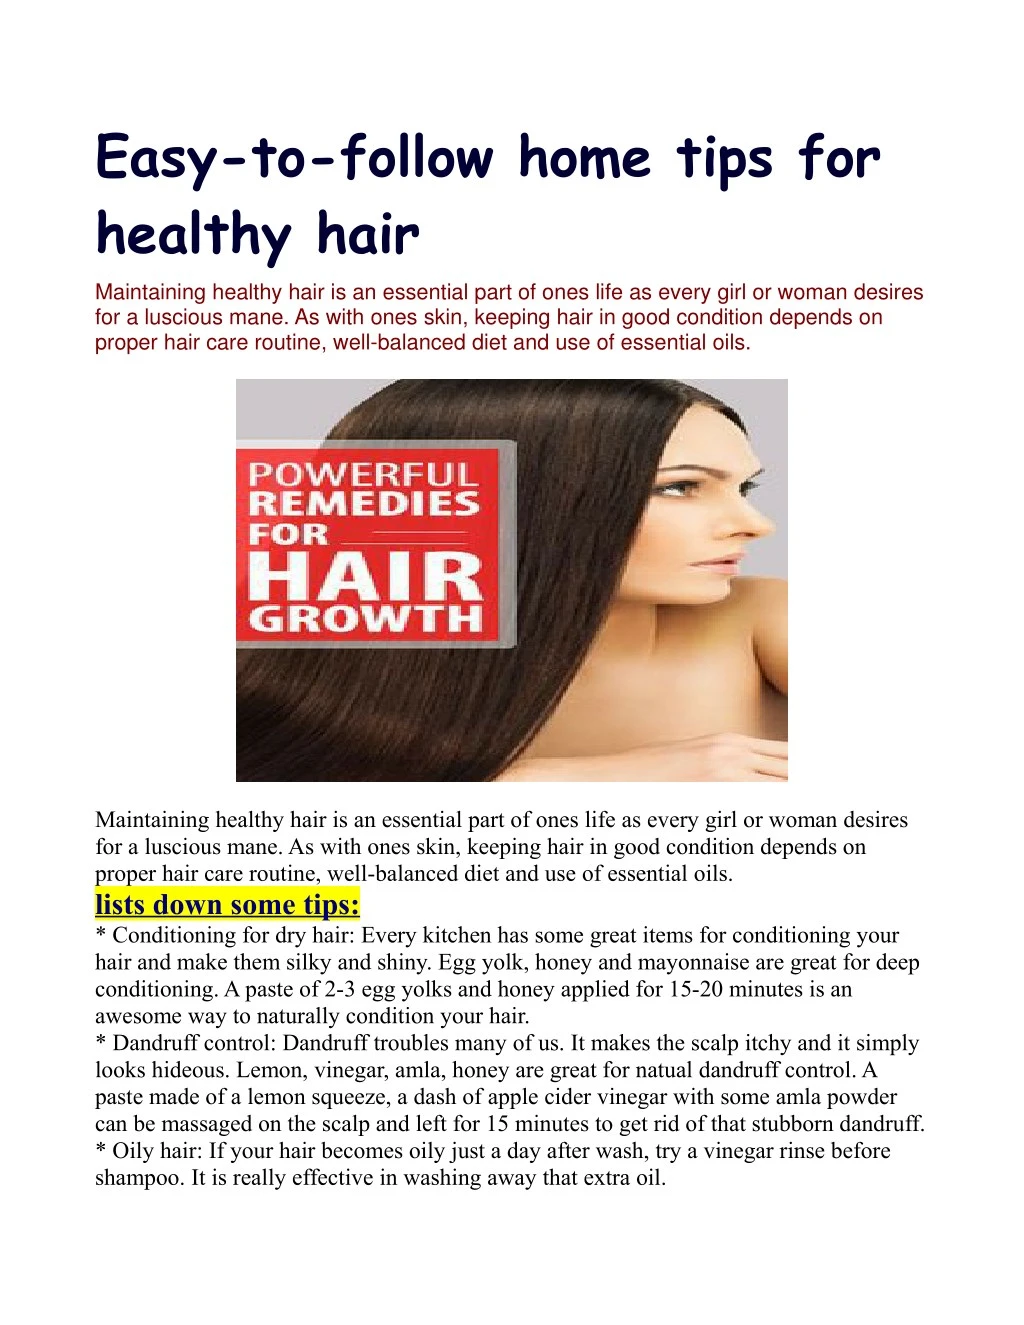 easy to follow home tips for healthy hair